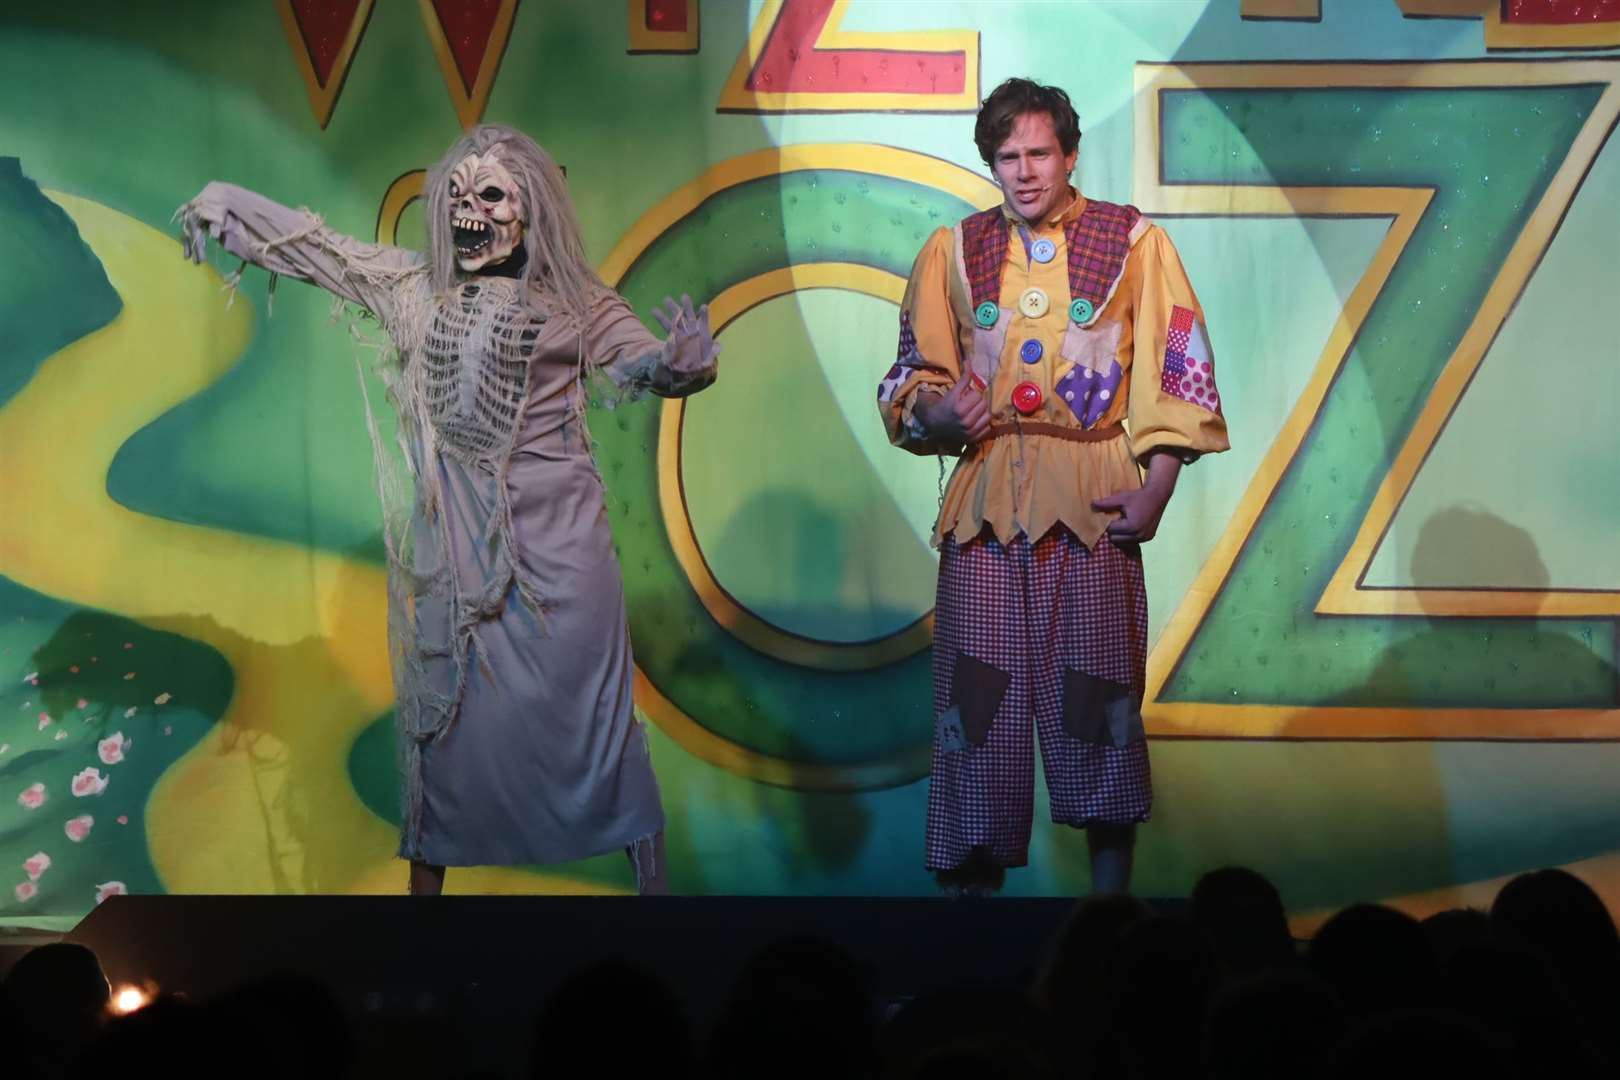 Scarecrow Tom Balmont gets caught by a ghoulie in the Wizard of Oz at Swallows Leisure Centre, Sittingbourne (24320946)